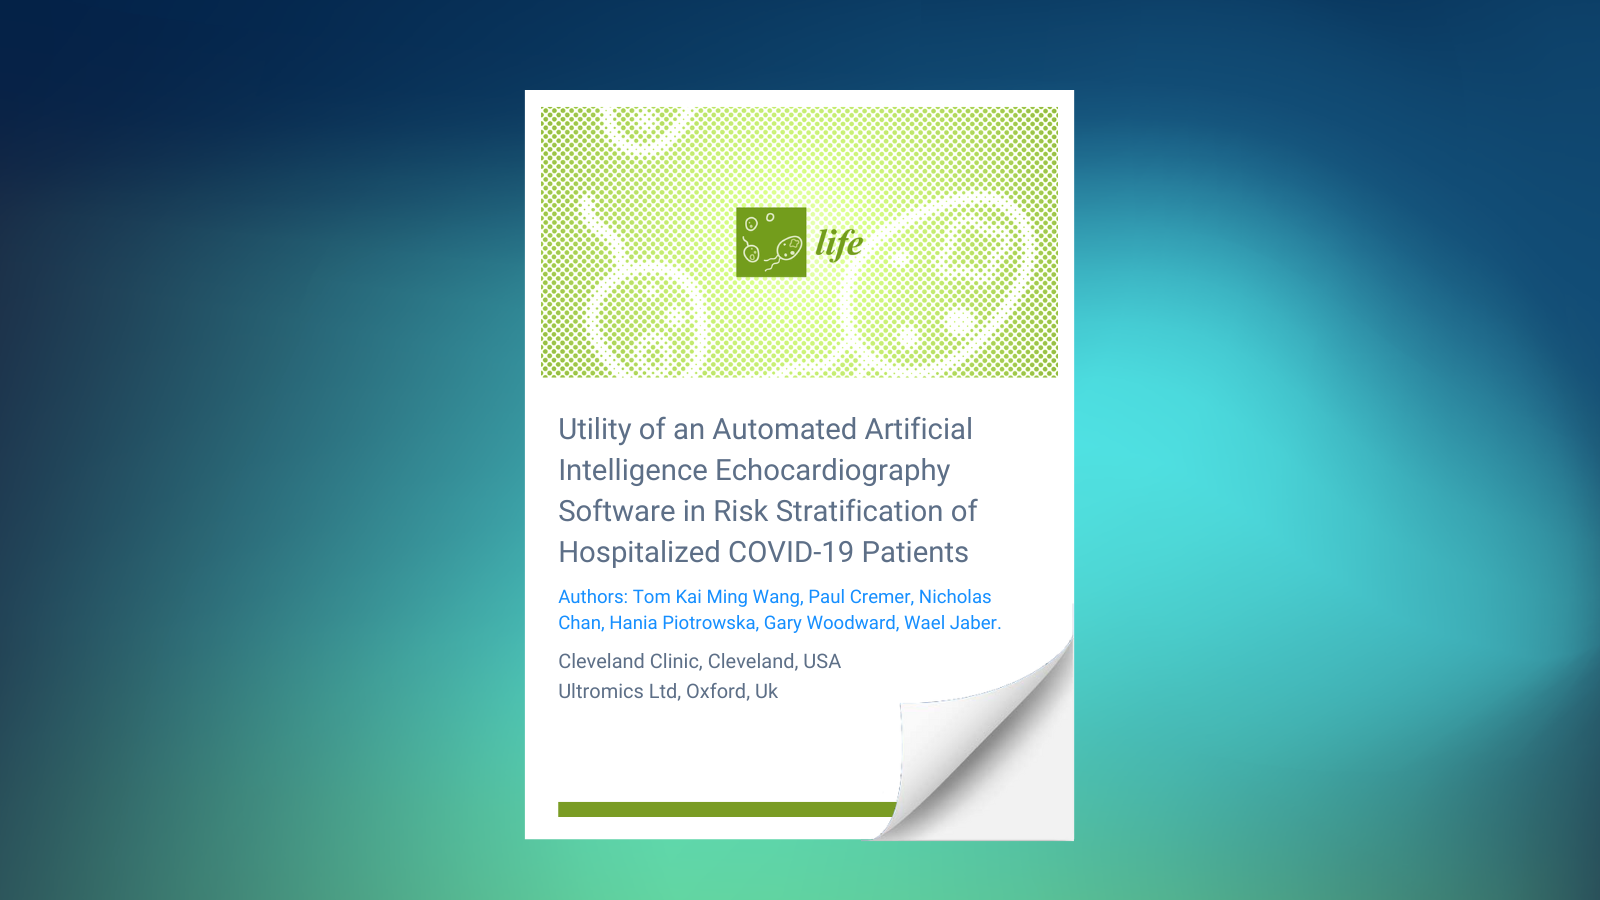 Utility of an Automated Artificial Intelligence Echocardiography Software in Risk Stratification of Hospitalized COVID-19 Patients